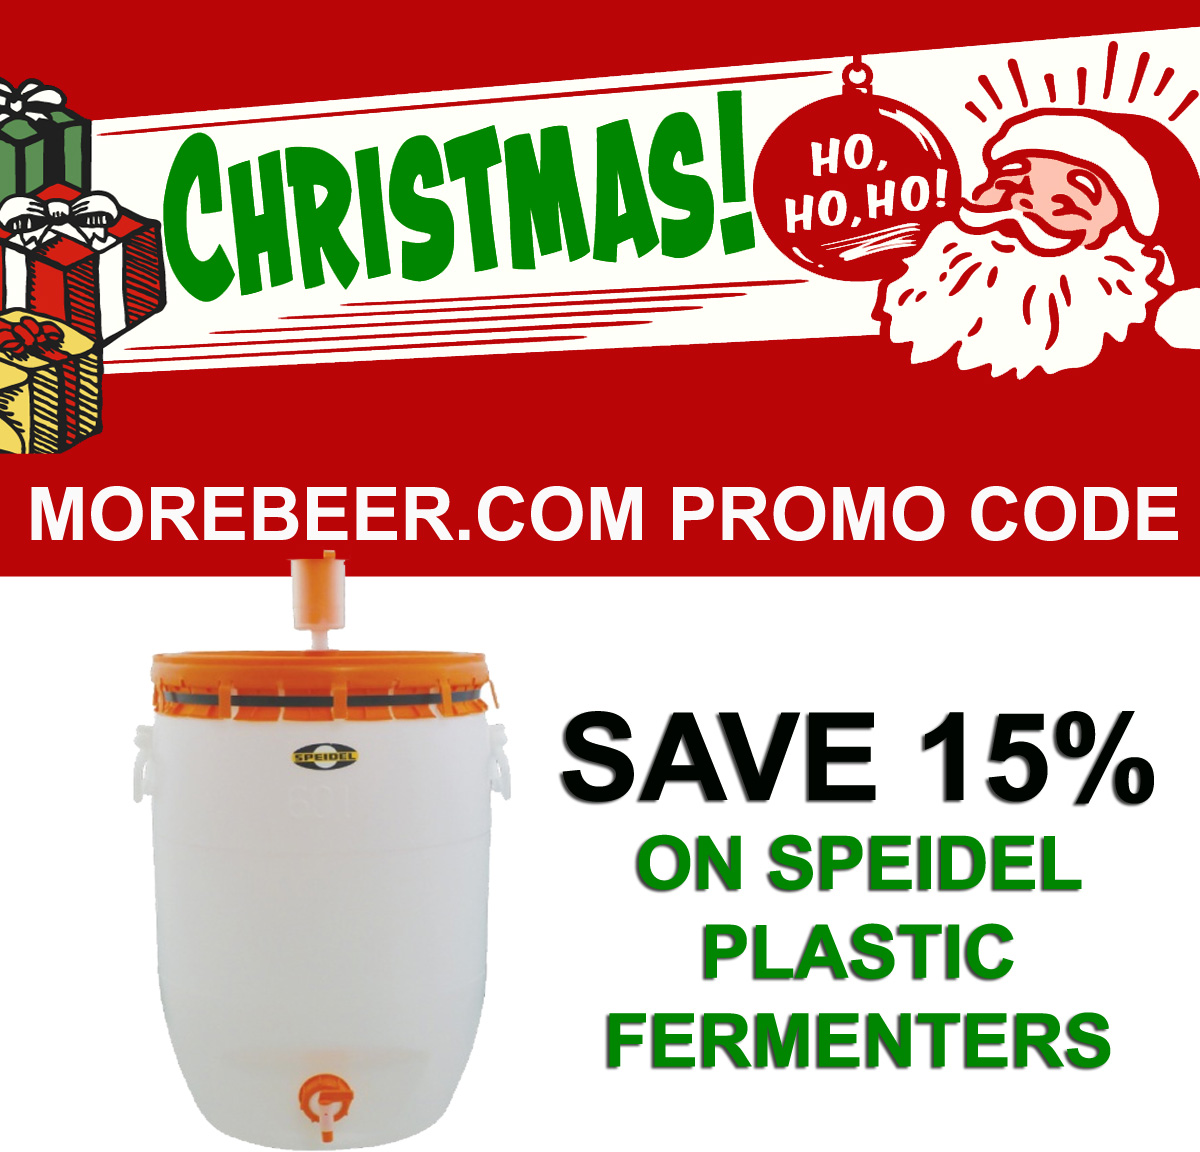  Coupon Code For Save 15% On Speidel Plastic Fermenters at More Beer Coupon Code